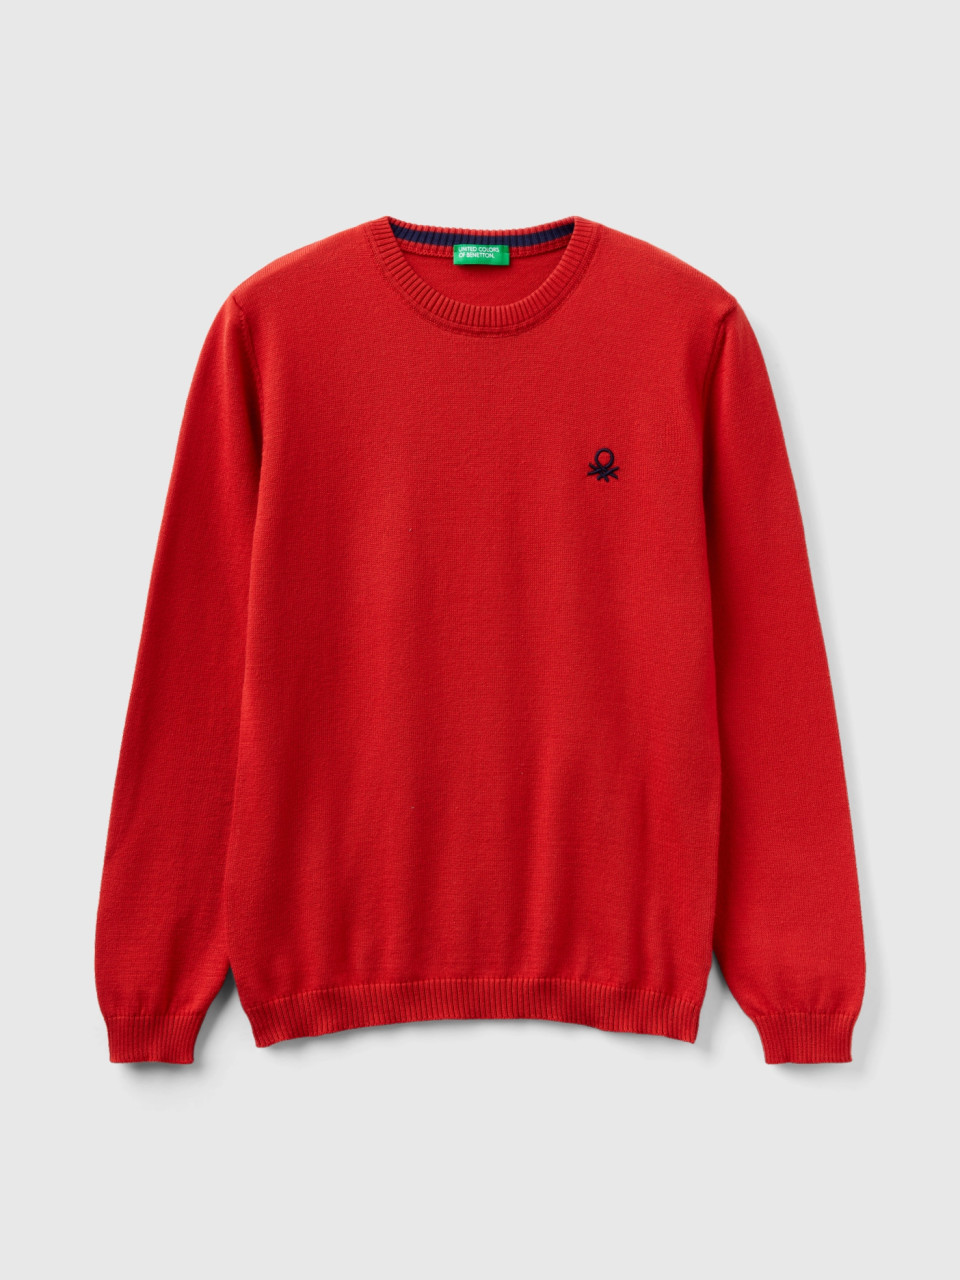 Benetton, Sweater In Pure Cotton With Logo, Brick Red, Kids